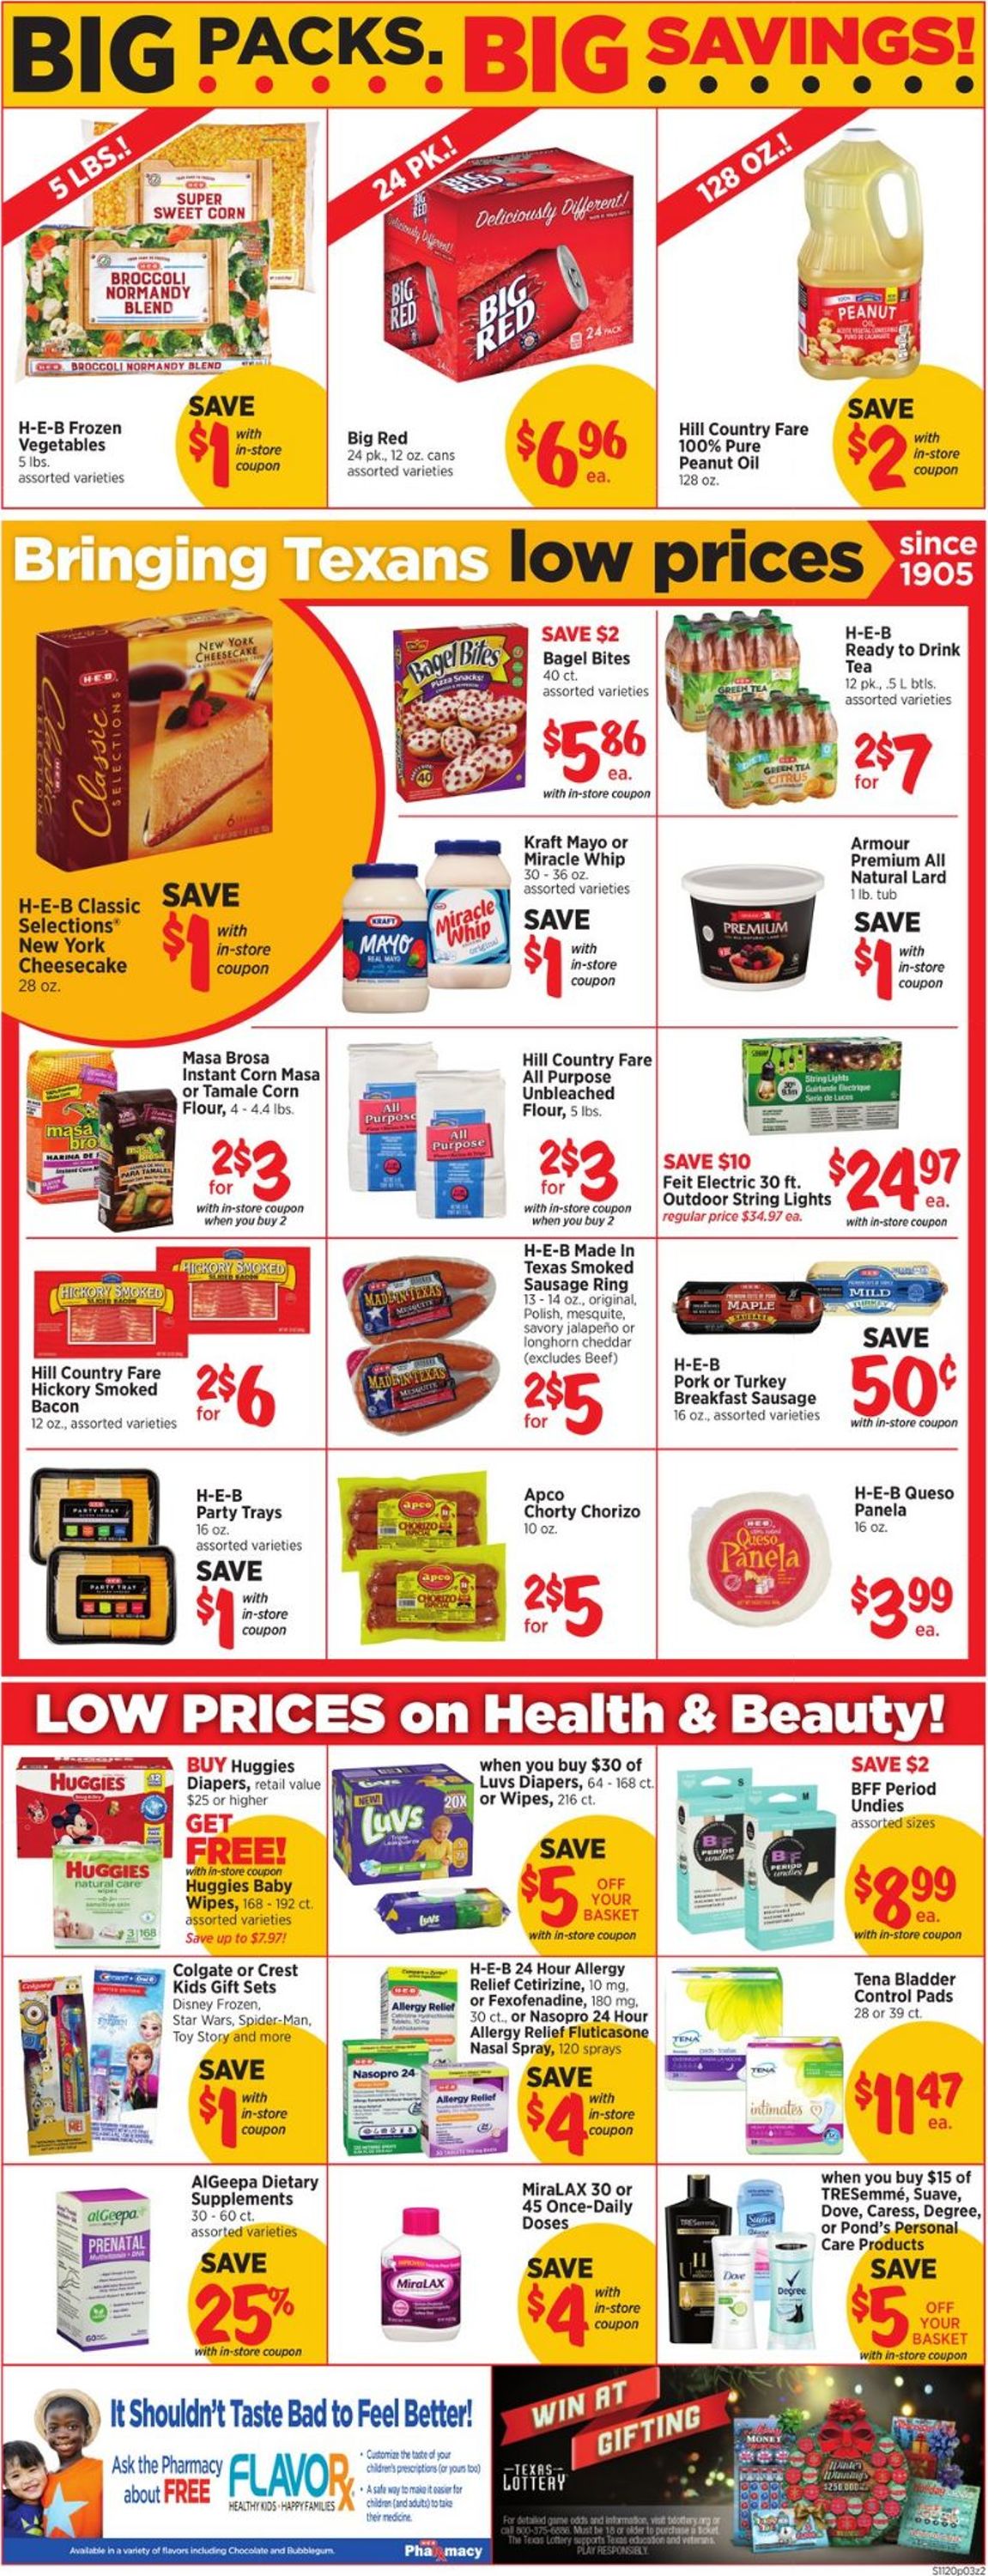 Catalogue H-E-B - Thanksgiving Ad 2019 from 11/20/2019